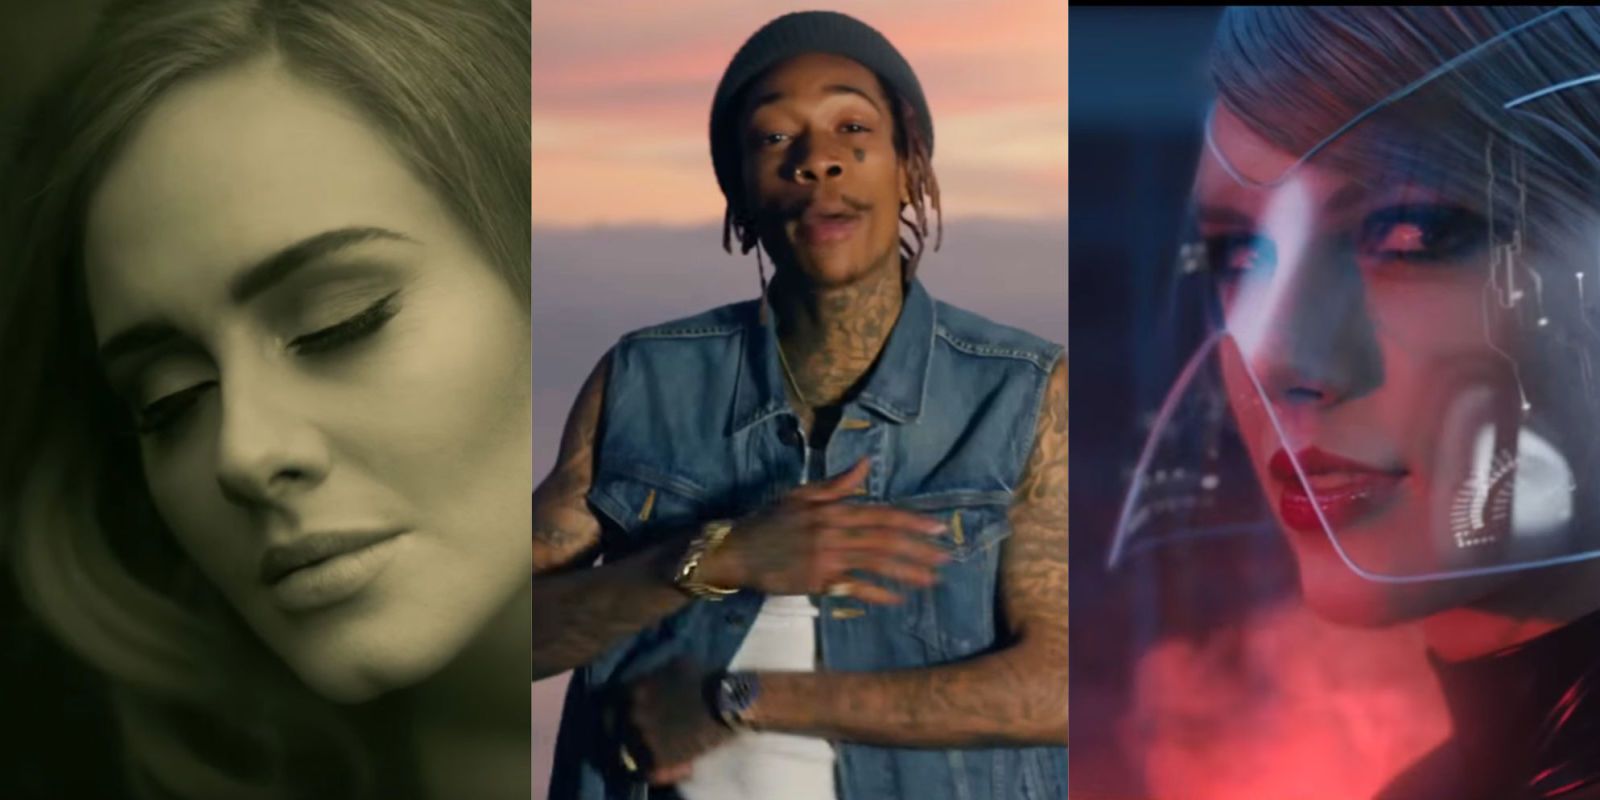 Most Popular Music Videos of 2015 - YouTube Lists Top 10 Trending Music